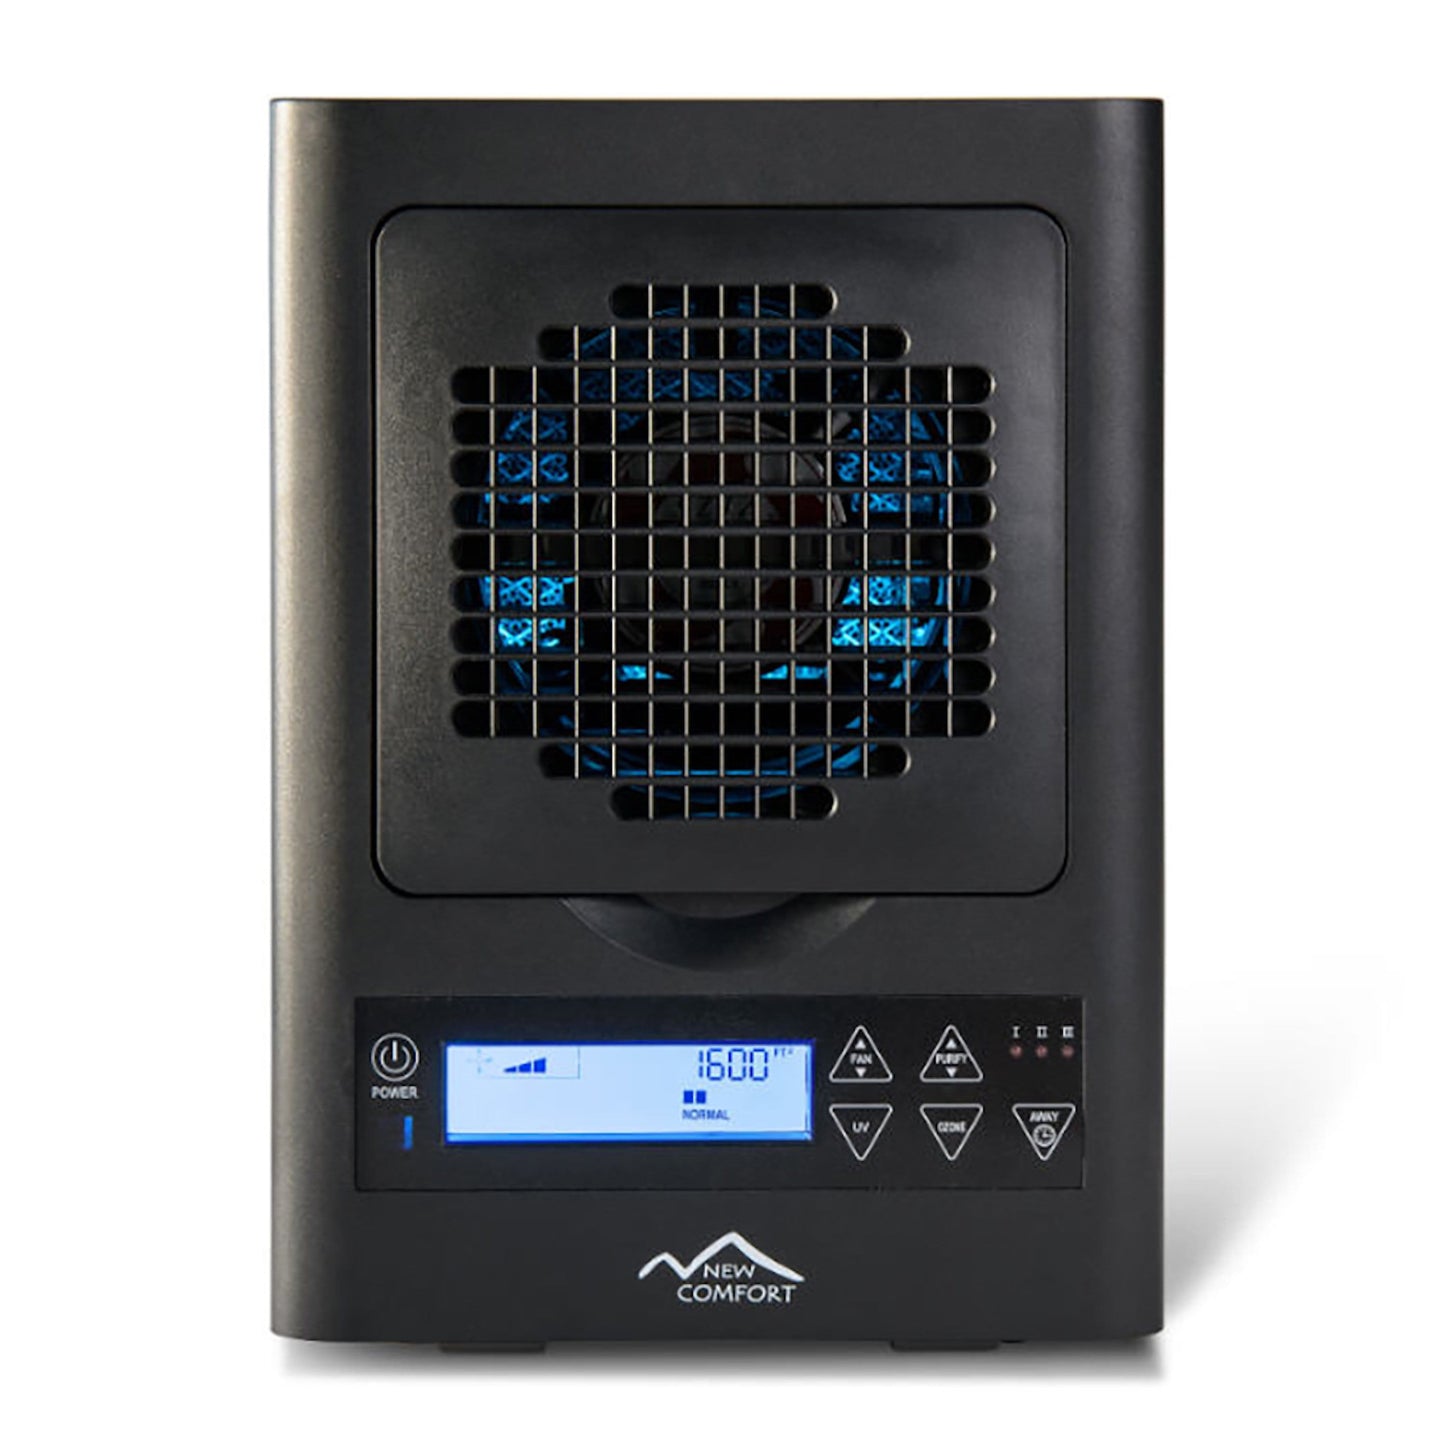 Demo Model New Comfort 6 Stage UV HEPA Ozone Generator Air Purifier with Remote and Warranty